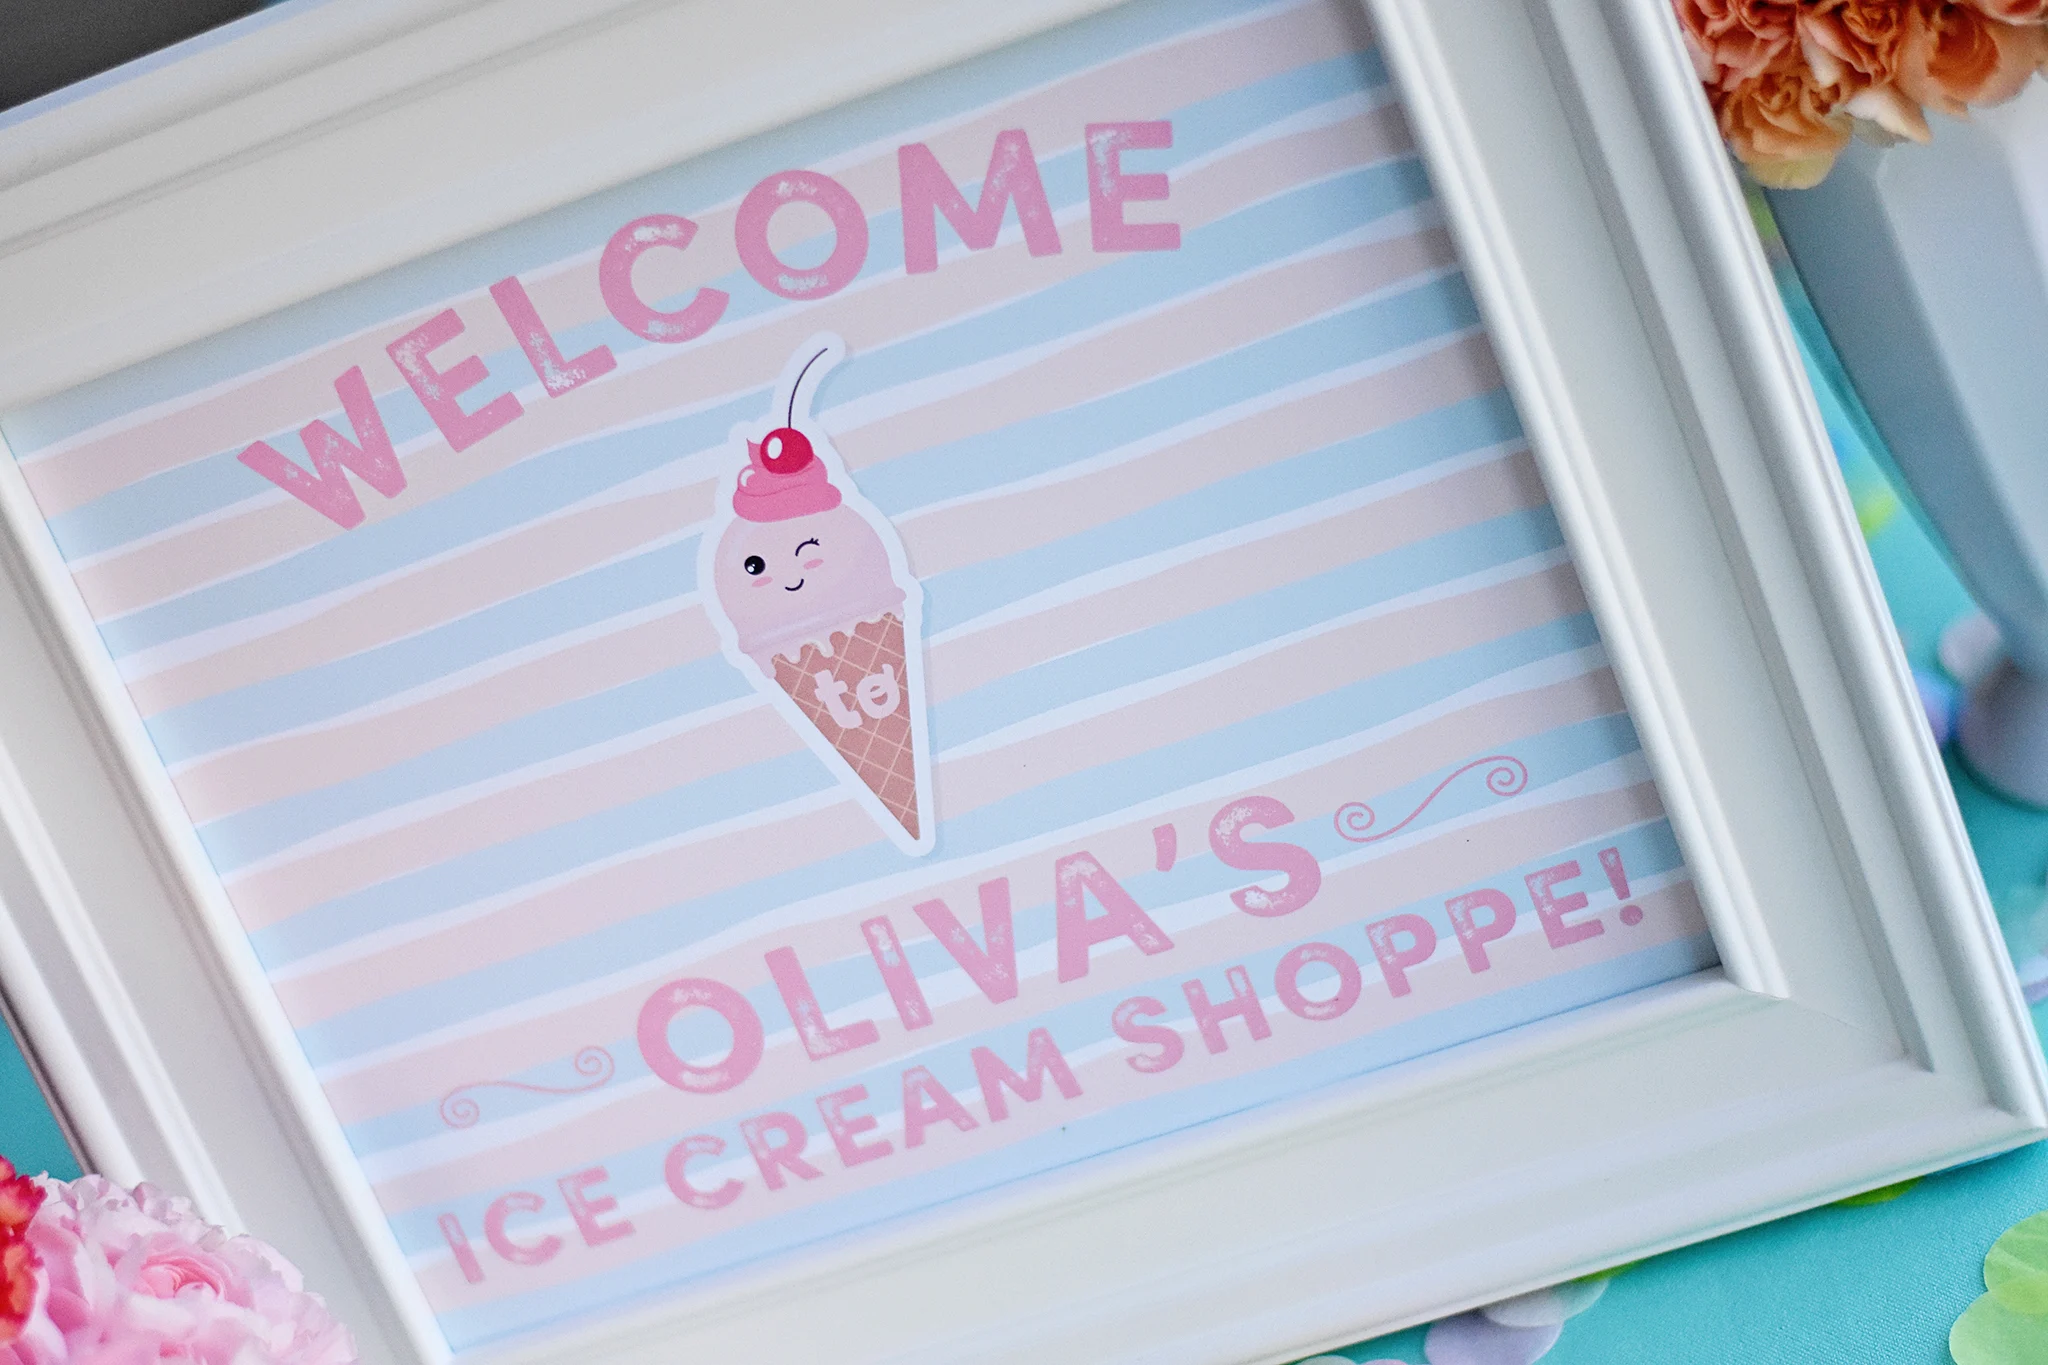 Welcome to the Ice Cream Shoppe!